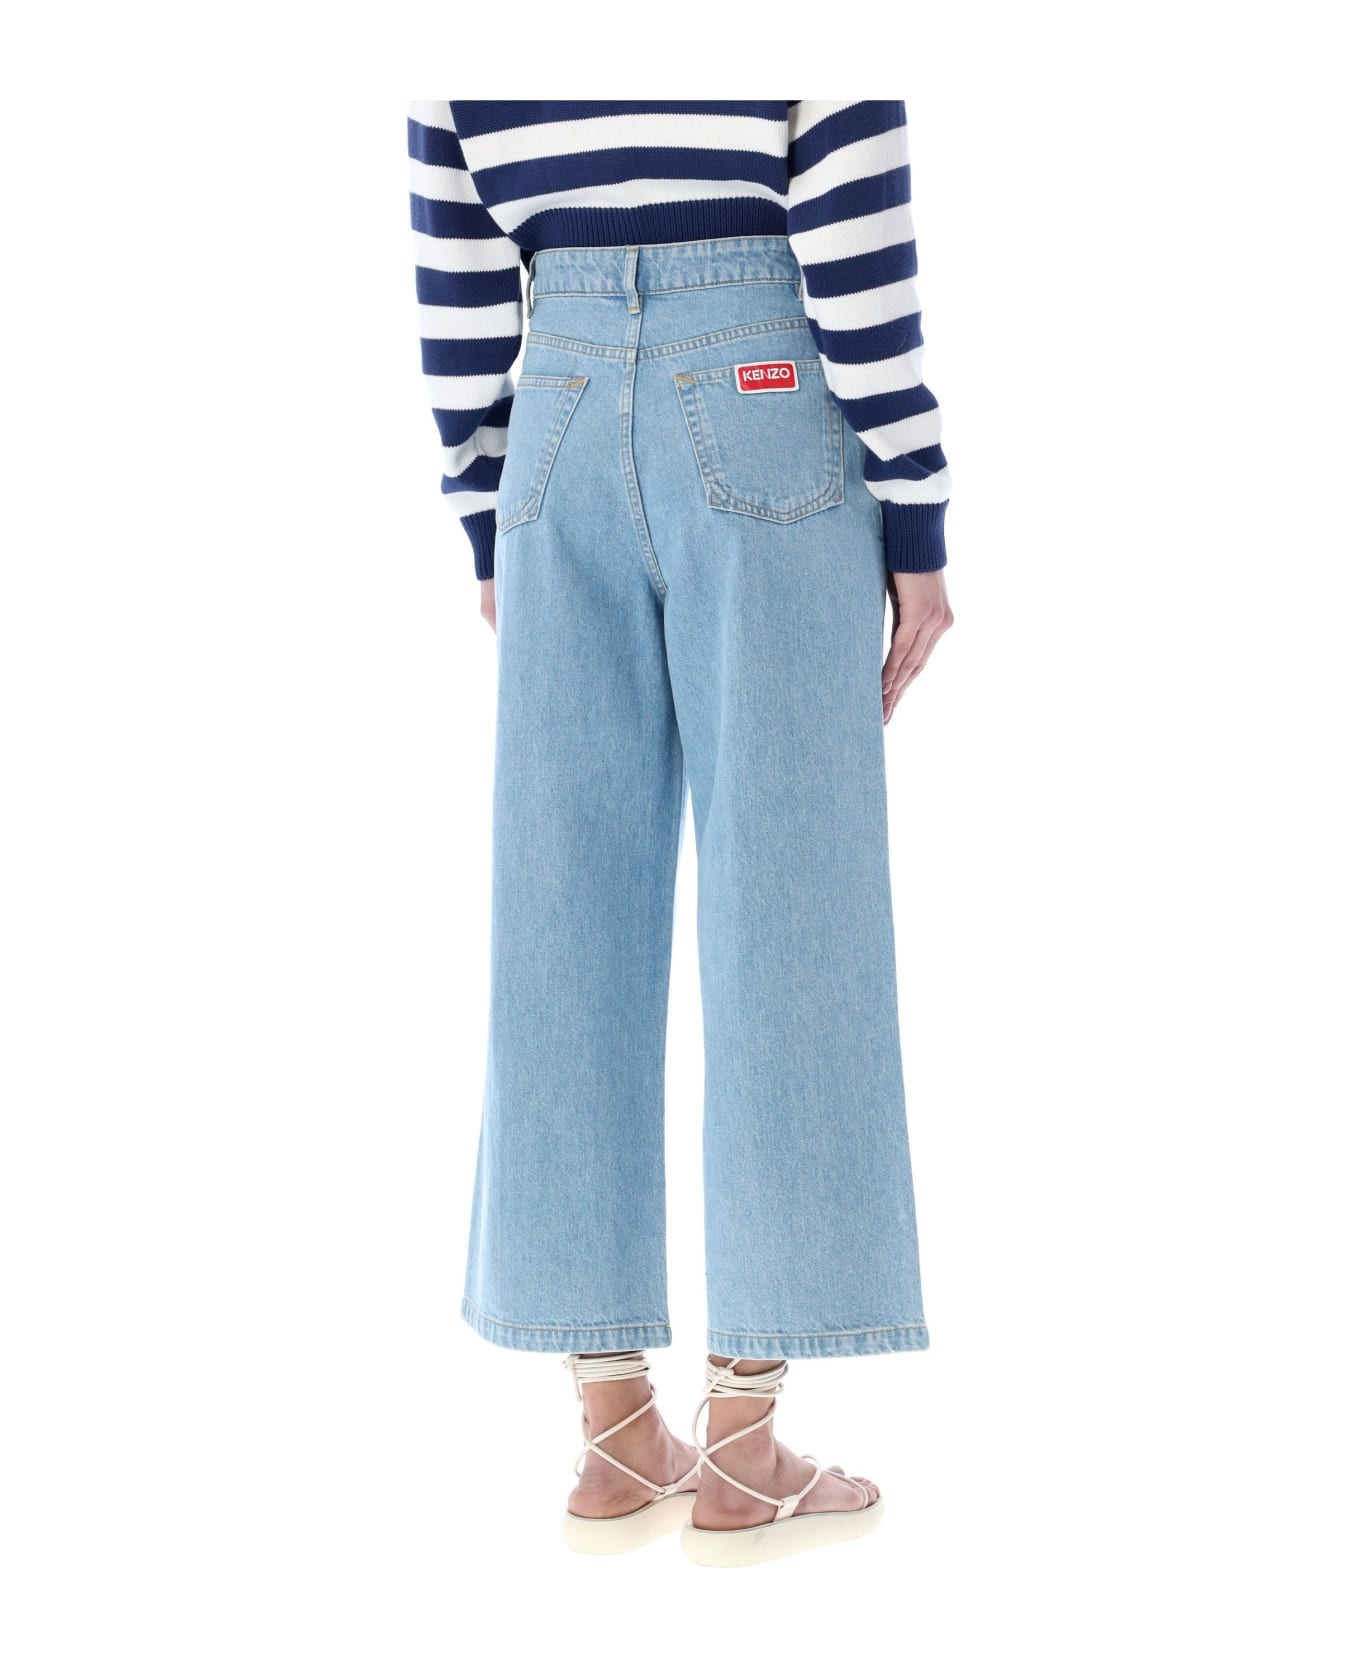 Sumire Cropped Jeans - 3